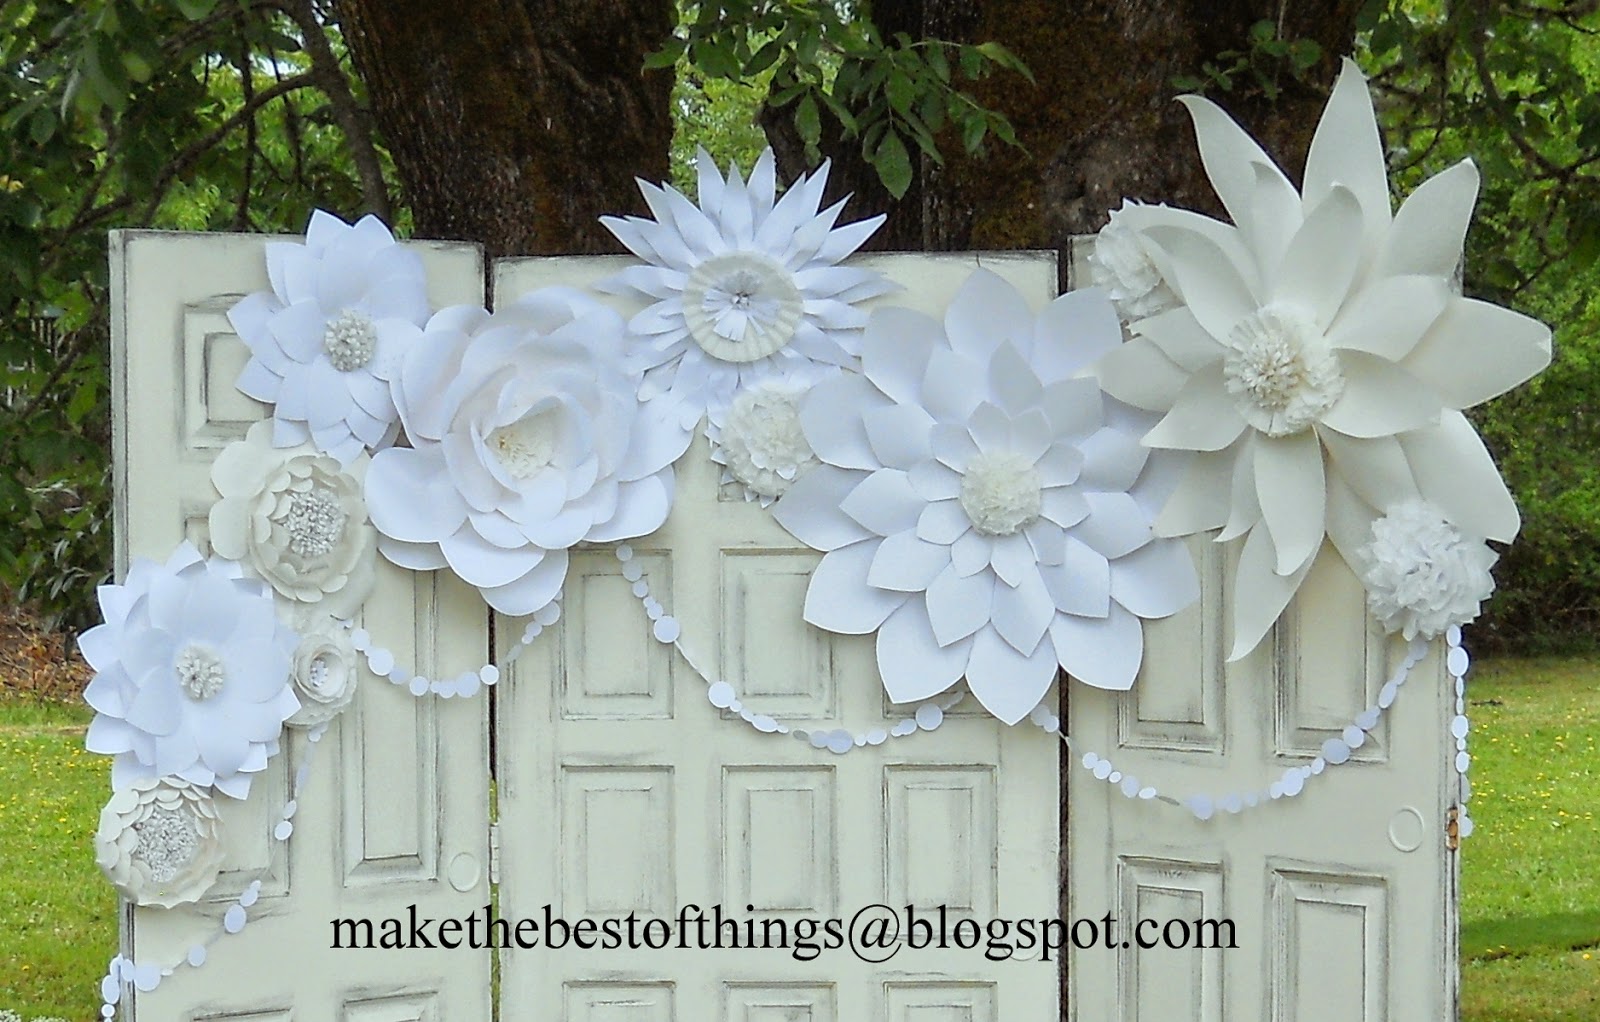 Giant Paper Flowers Wall Decor Ideas